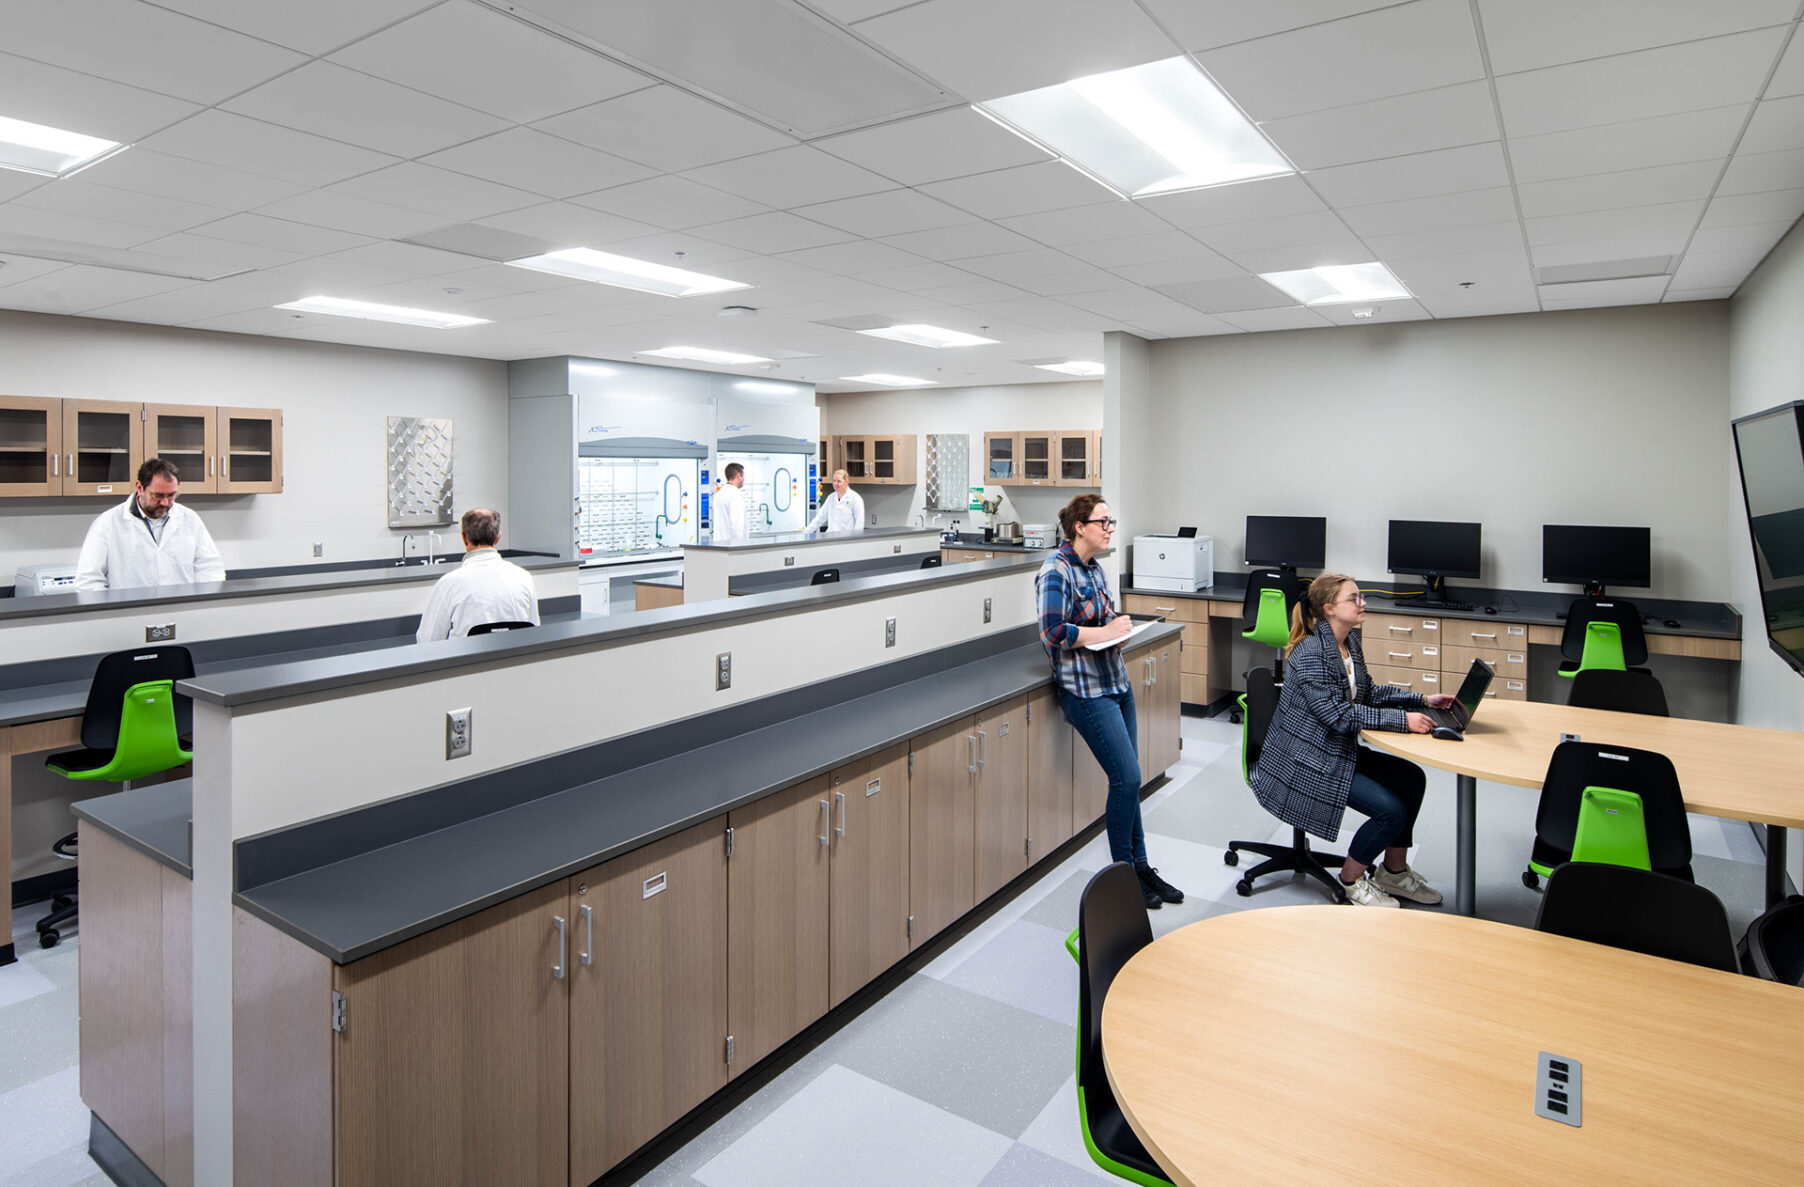 JCCC Science Laboratory Renovation and Additions